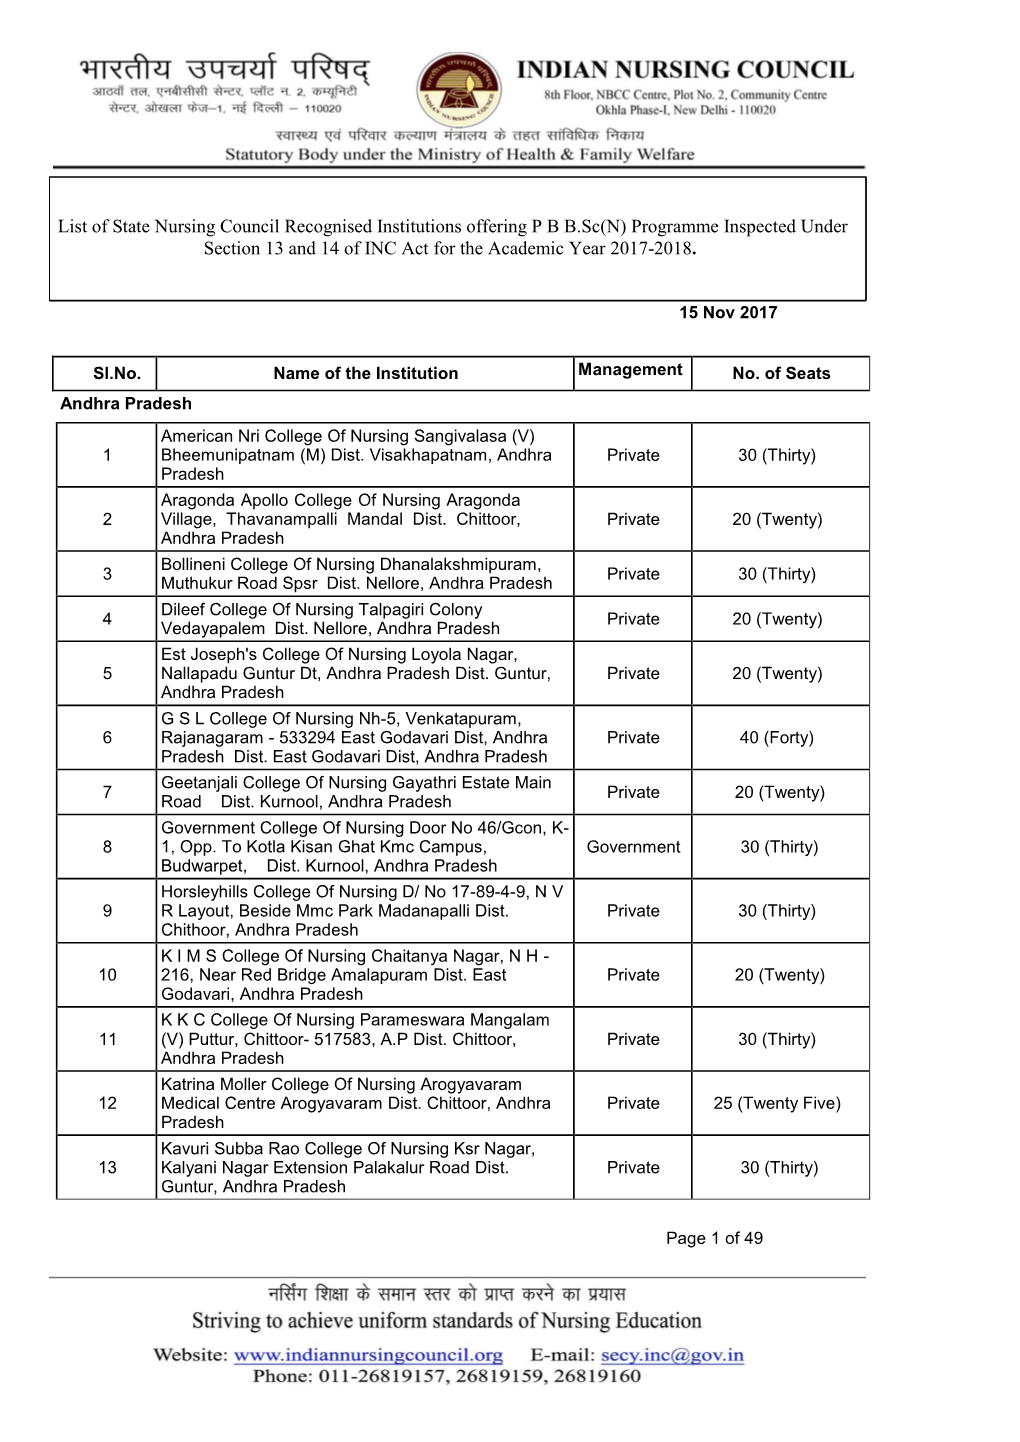 List of State Nursing Council Recognised Institutions Offering P B B.Sc(N) Programme Inspected Under Section 13 and 14 of INC Act for the Academic Year 2017-2018